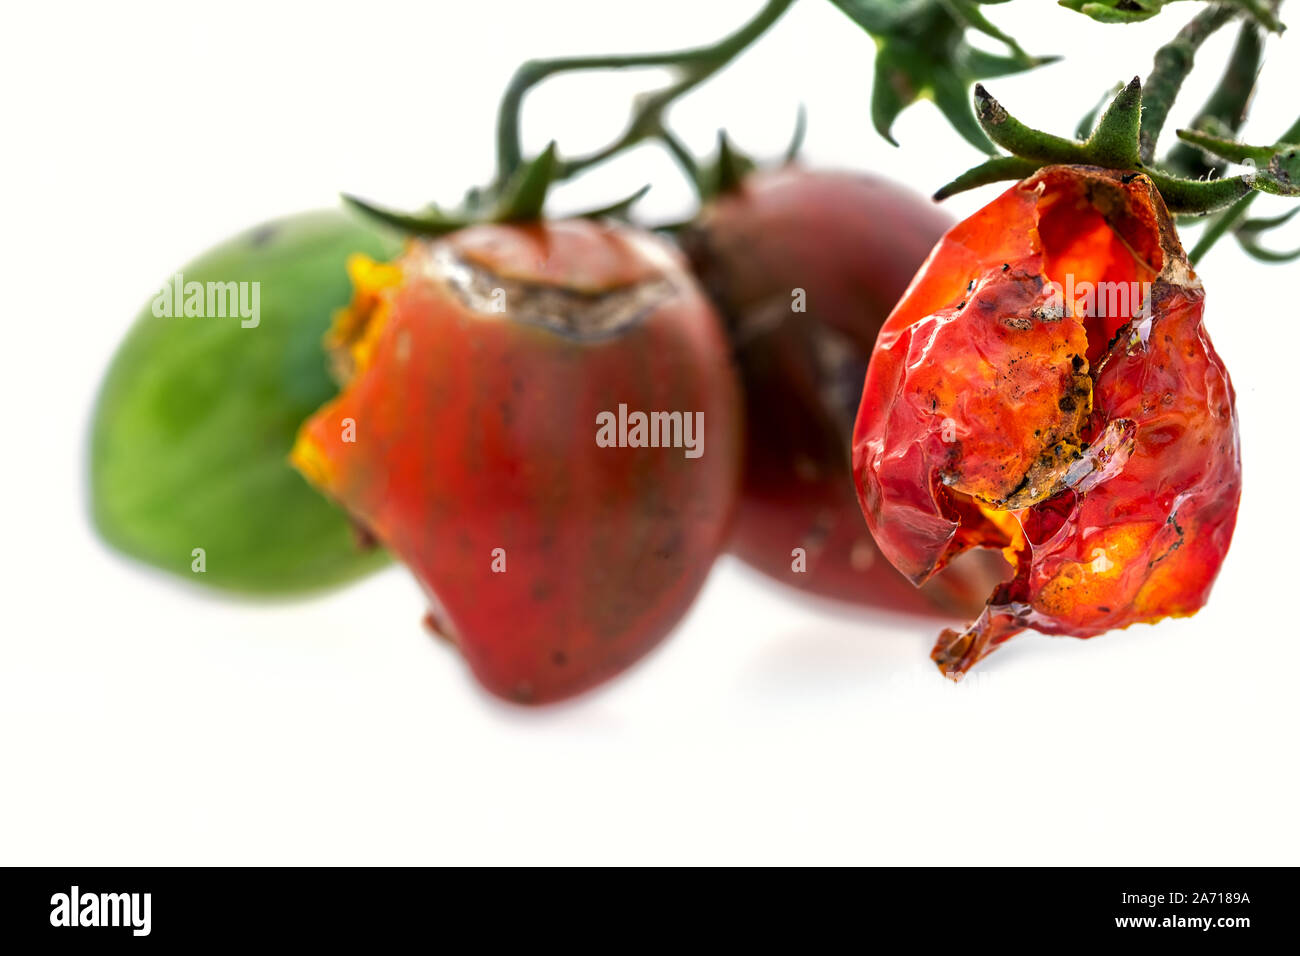 one rotten tomato in focus on the right, three blurry ones in the background, all isolated on white Stock Photo